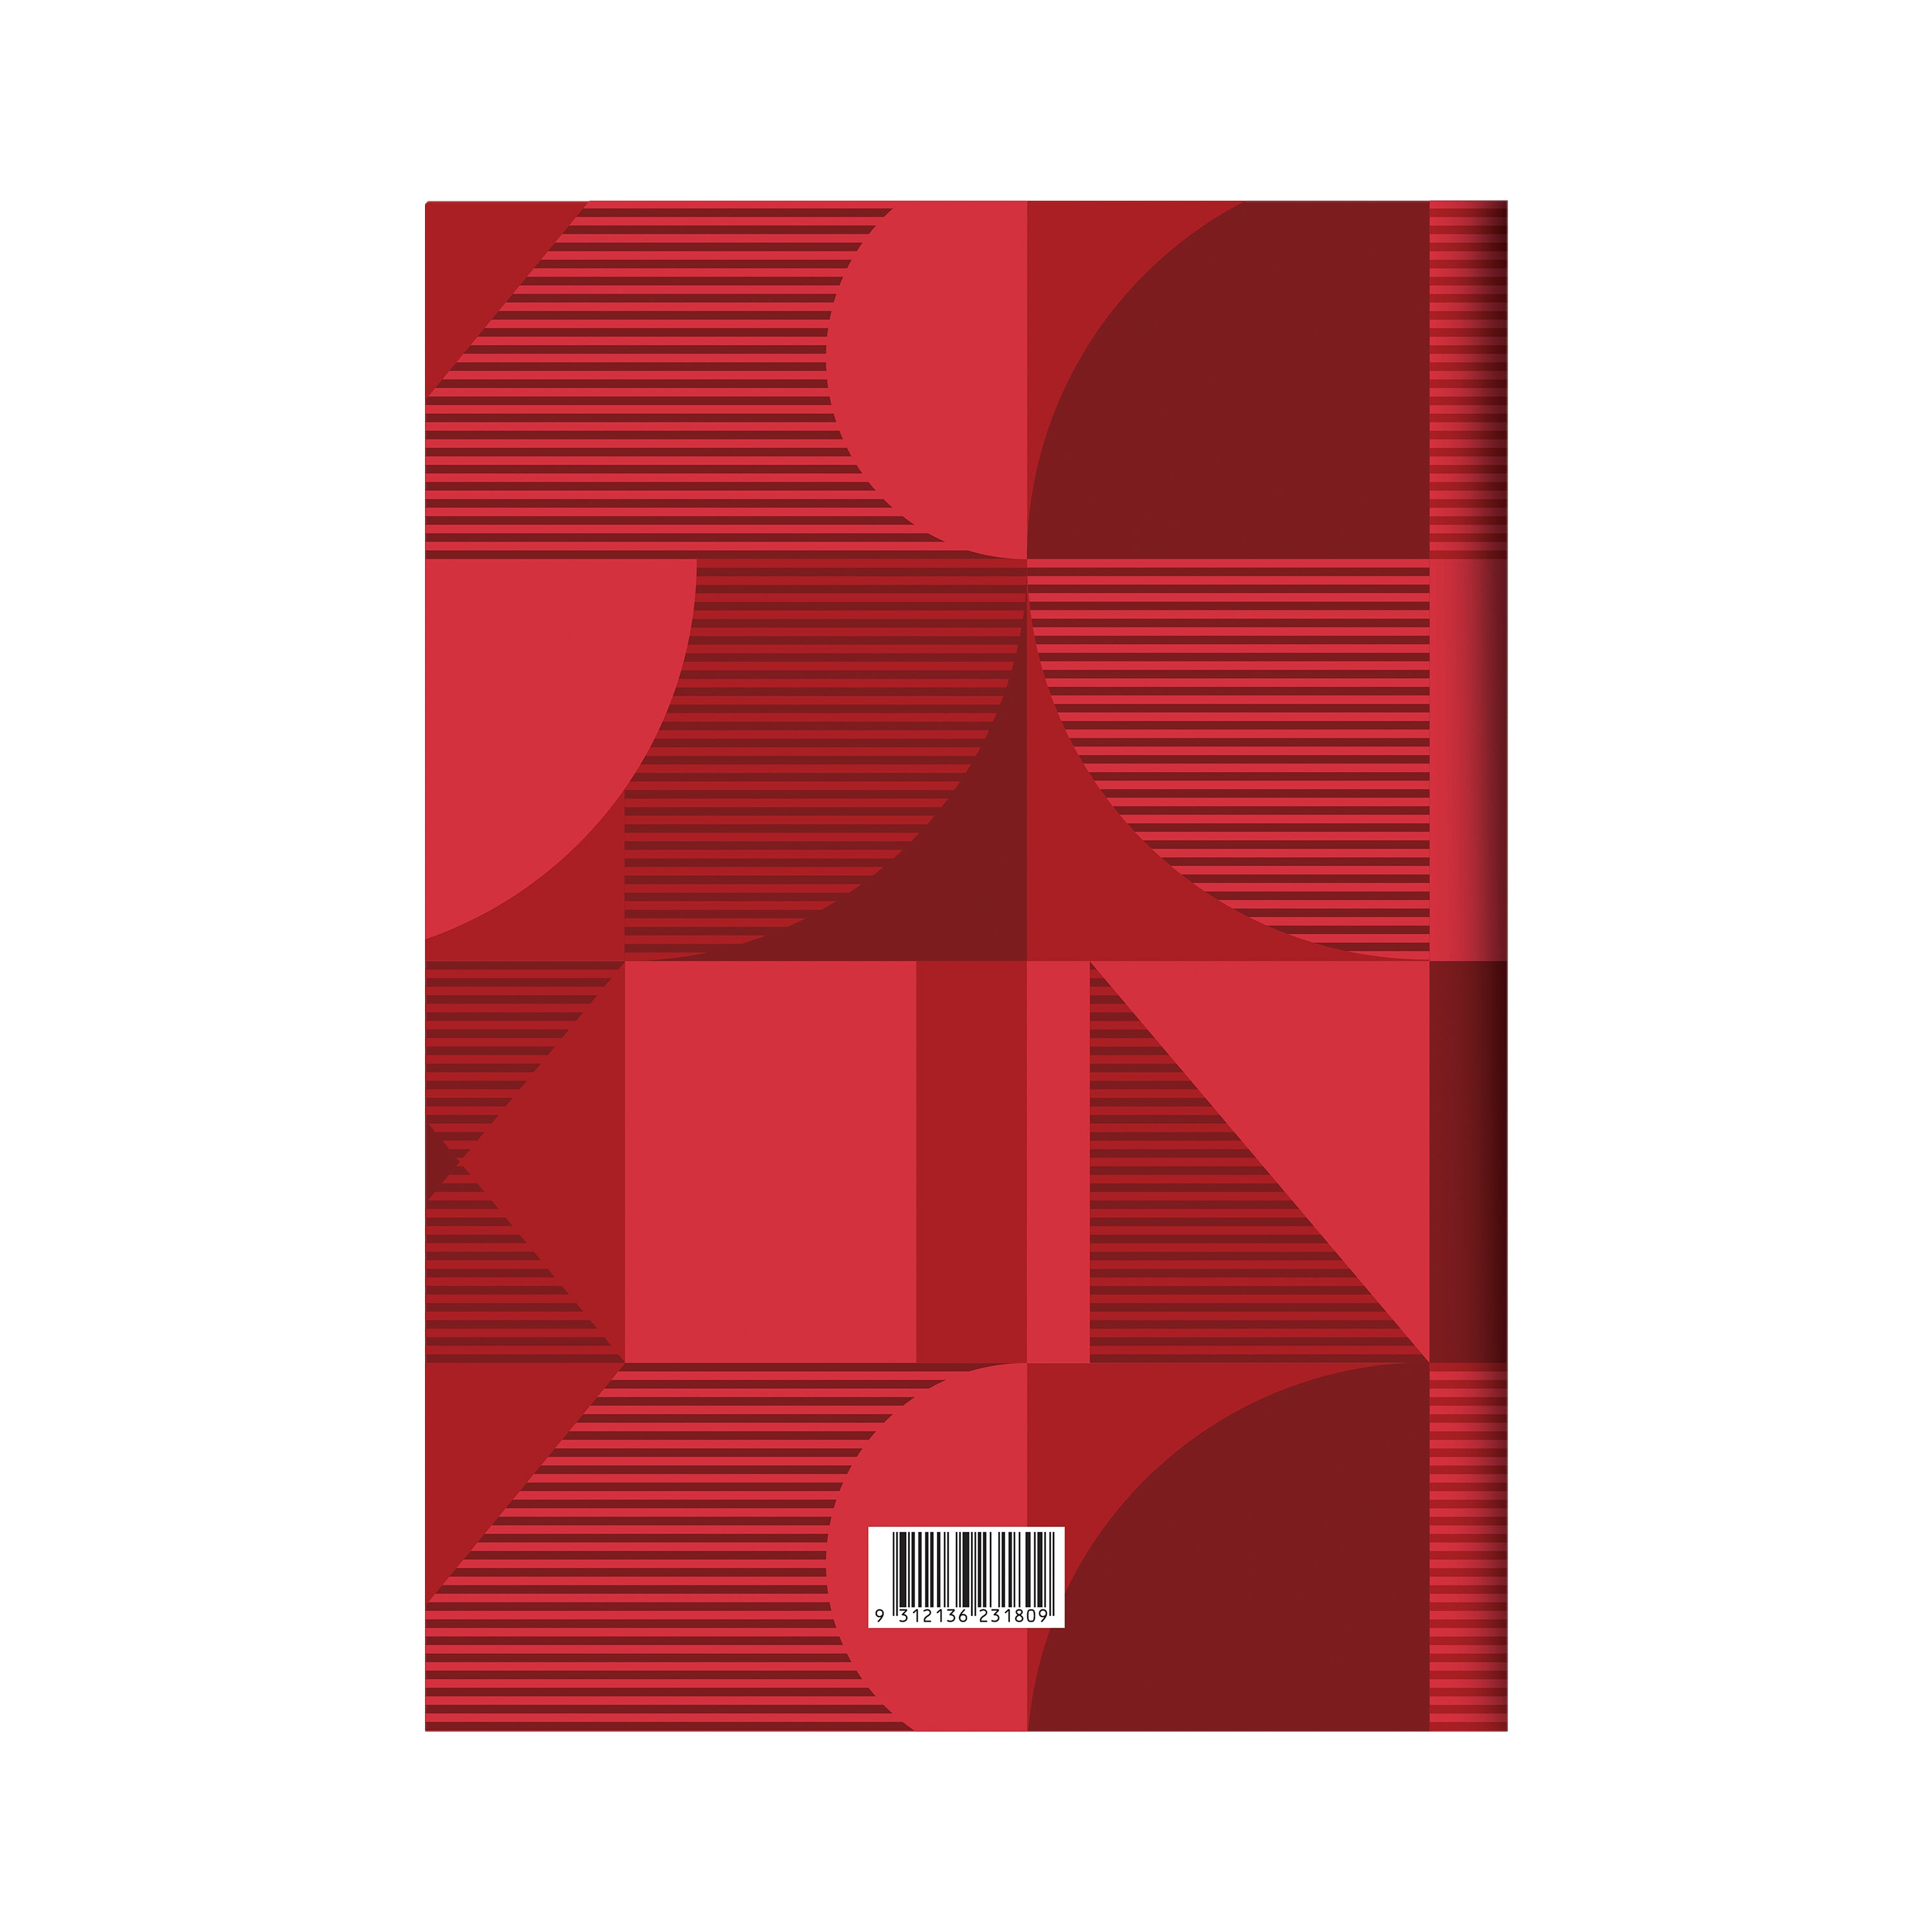 Colplan 2024 Diary - Month to View (Geo Pattern), Size A4 Red / A4 (297 x 210mm)